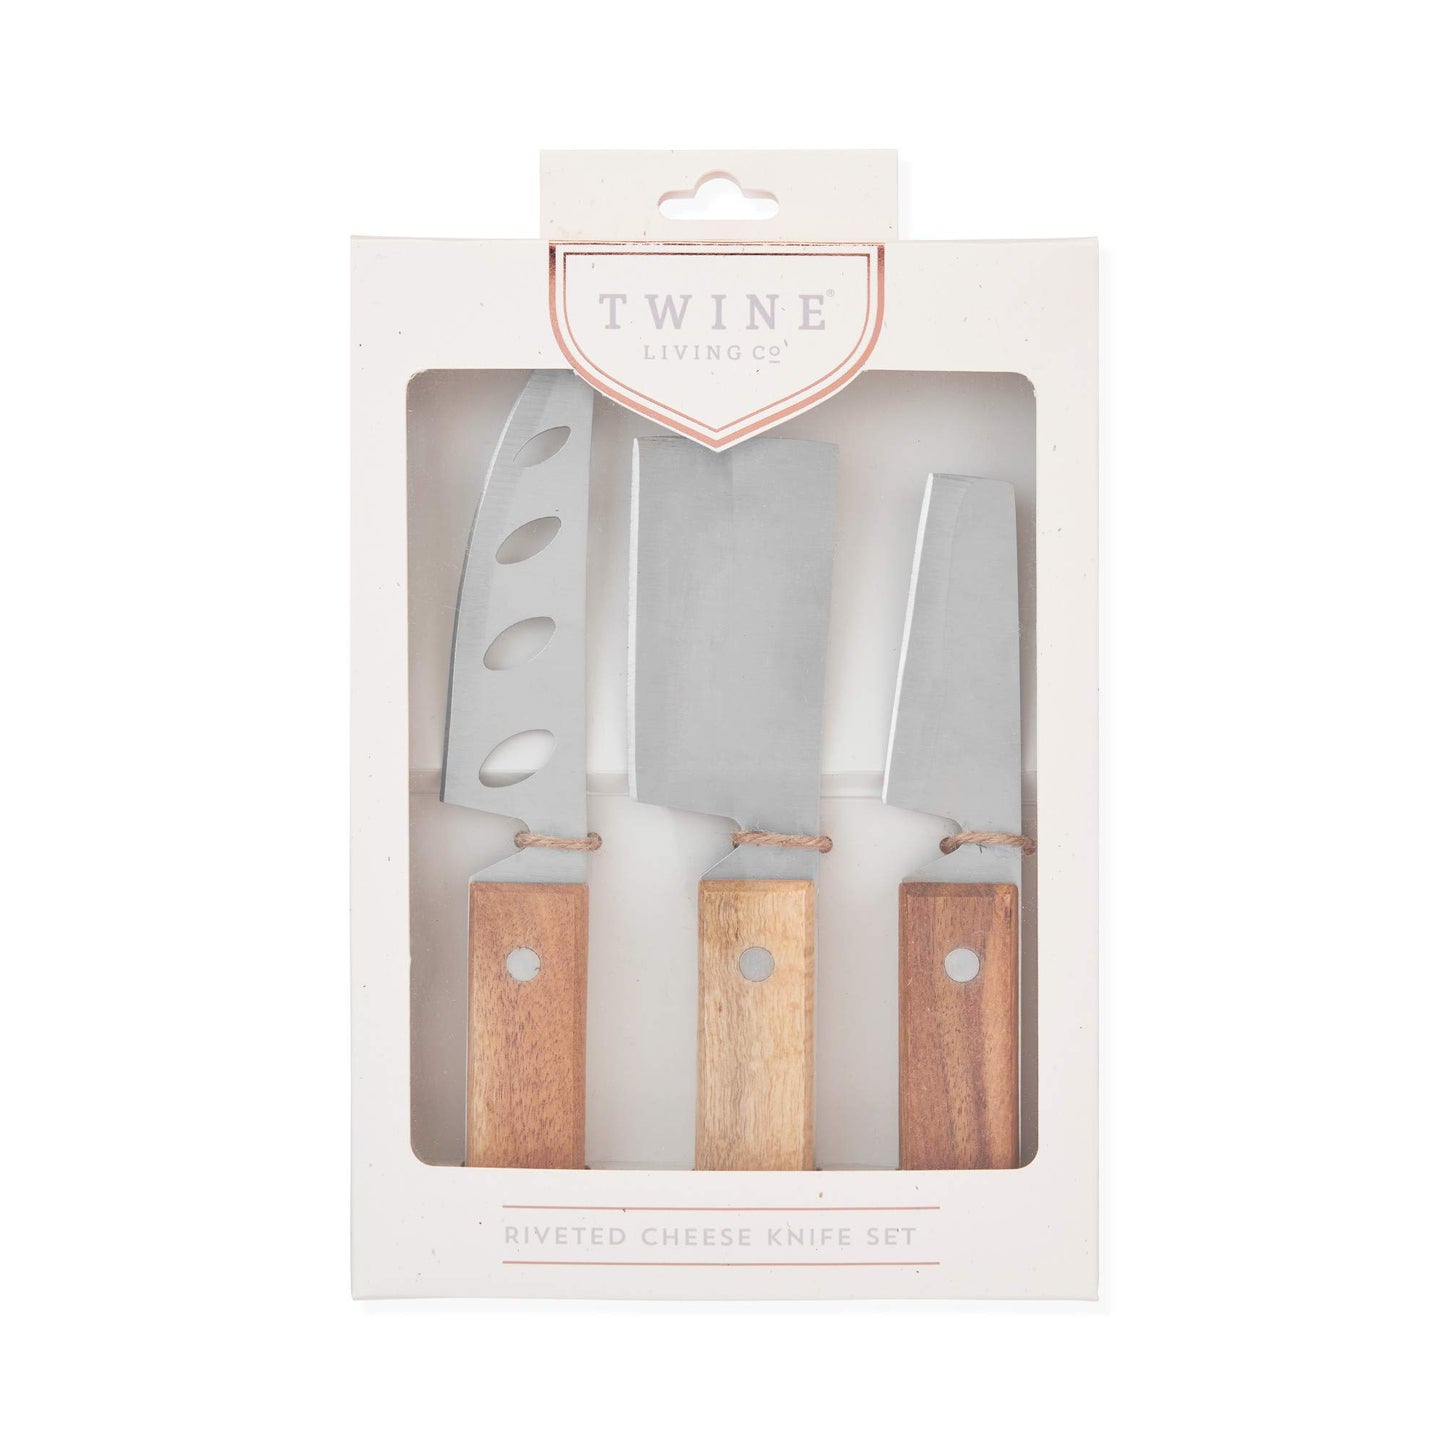 Twine Rustic Cheese Knife Set - Stainless Steel Knife Set - Charcuterie Tools Cheese Board Accessories - Stainless Steel and Wood, Set of 3